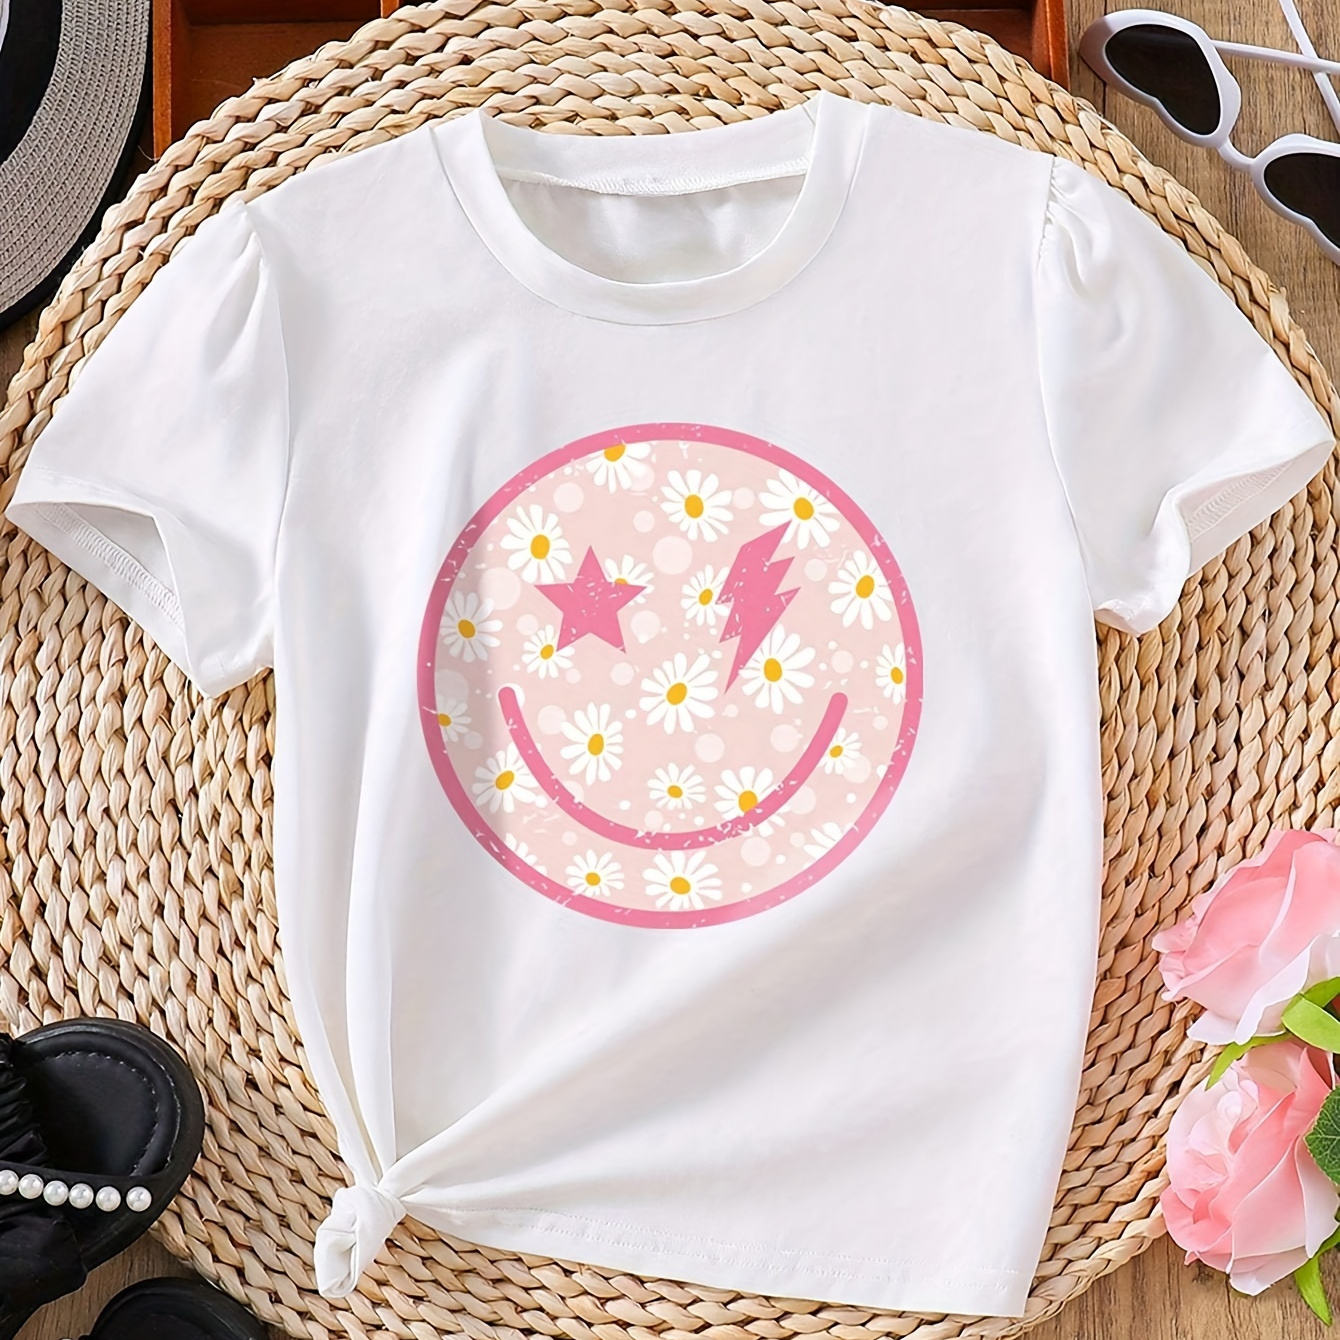 

Knit Smile Face Graphic Short Sleeve Crew Neck T-shirt For Girls, Casual Comfy Breathable Summer Tee Top Versatile Gift